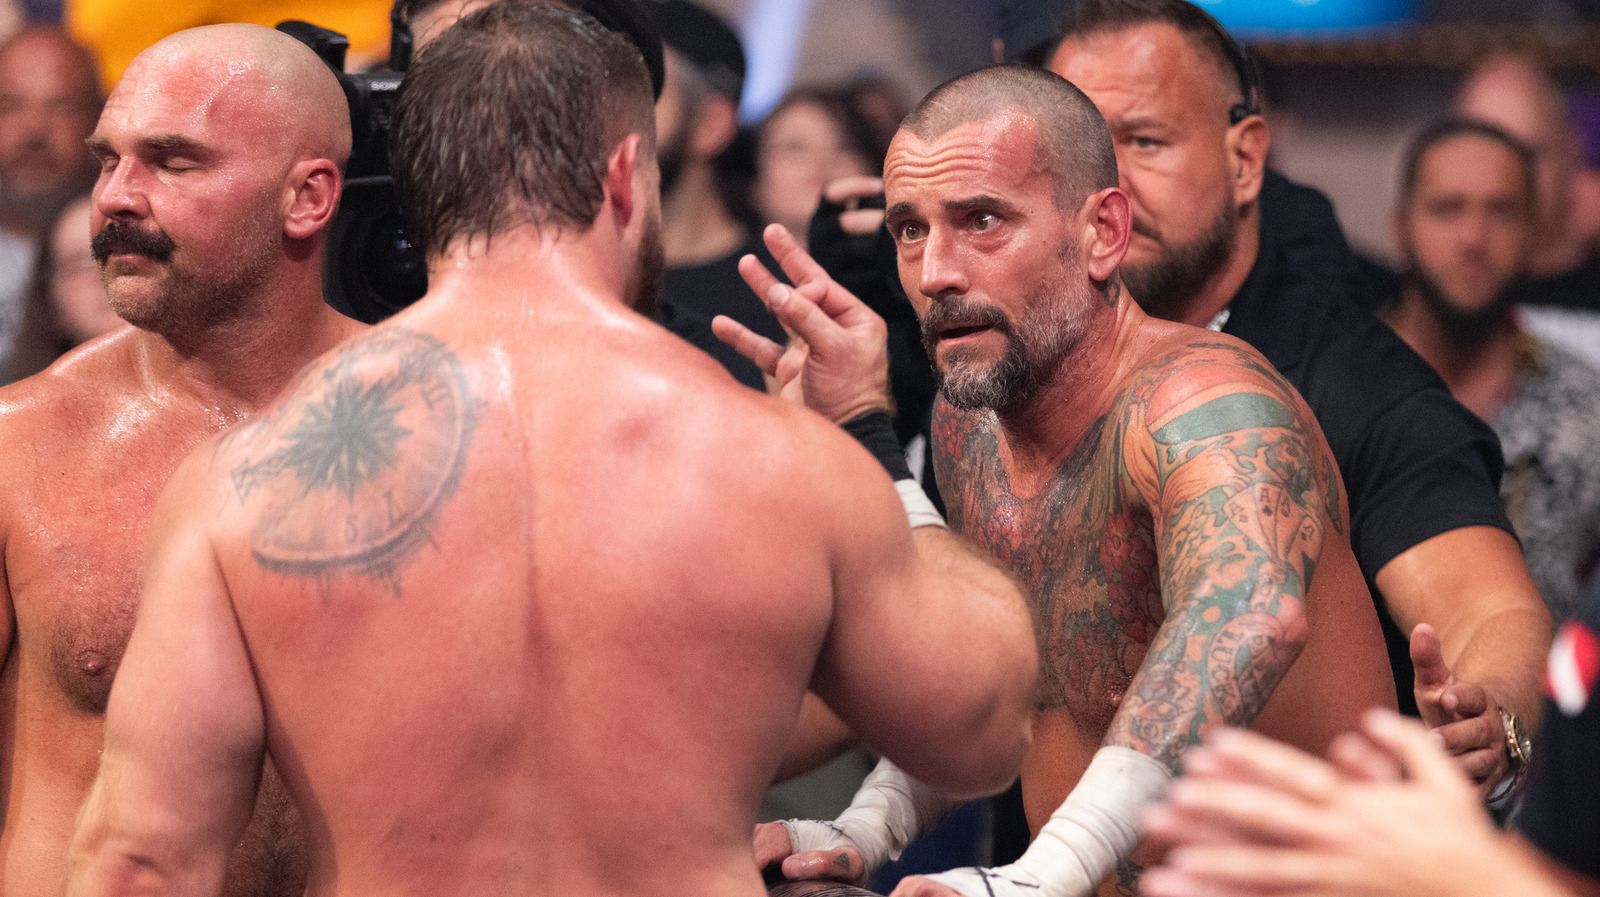 More Info On CM Punk's Post-Collision Comments, Why Christopher Daniels Was Sent Home